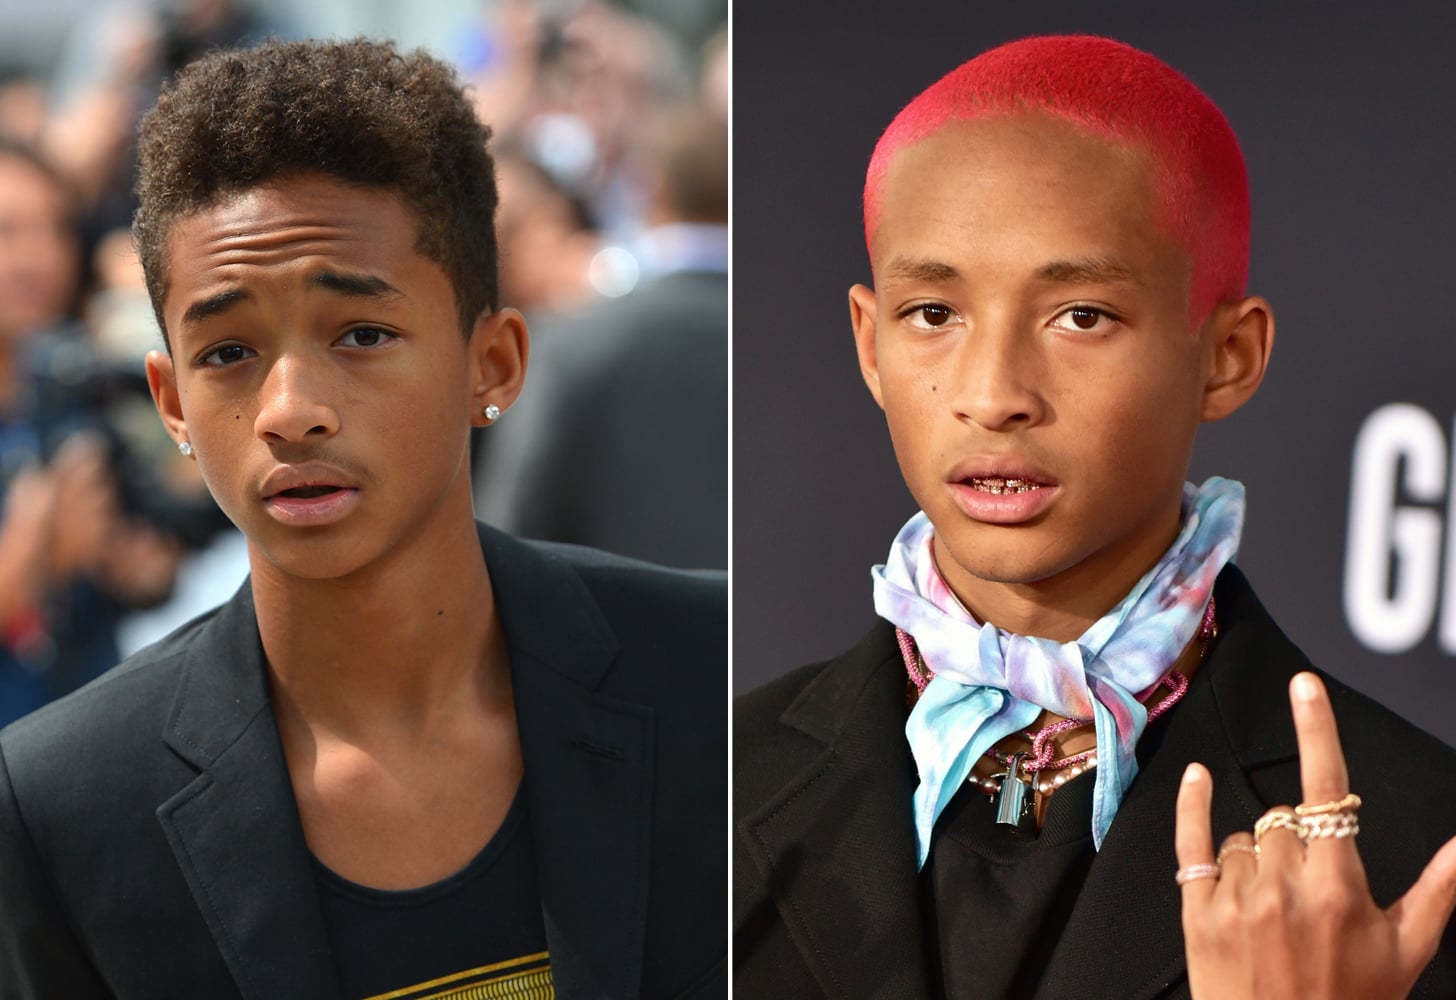 Jaden Smith shows off new buzzcut hairdo at the Met Gala 2017 - and takes  his old dreadlocks as his date